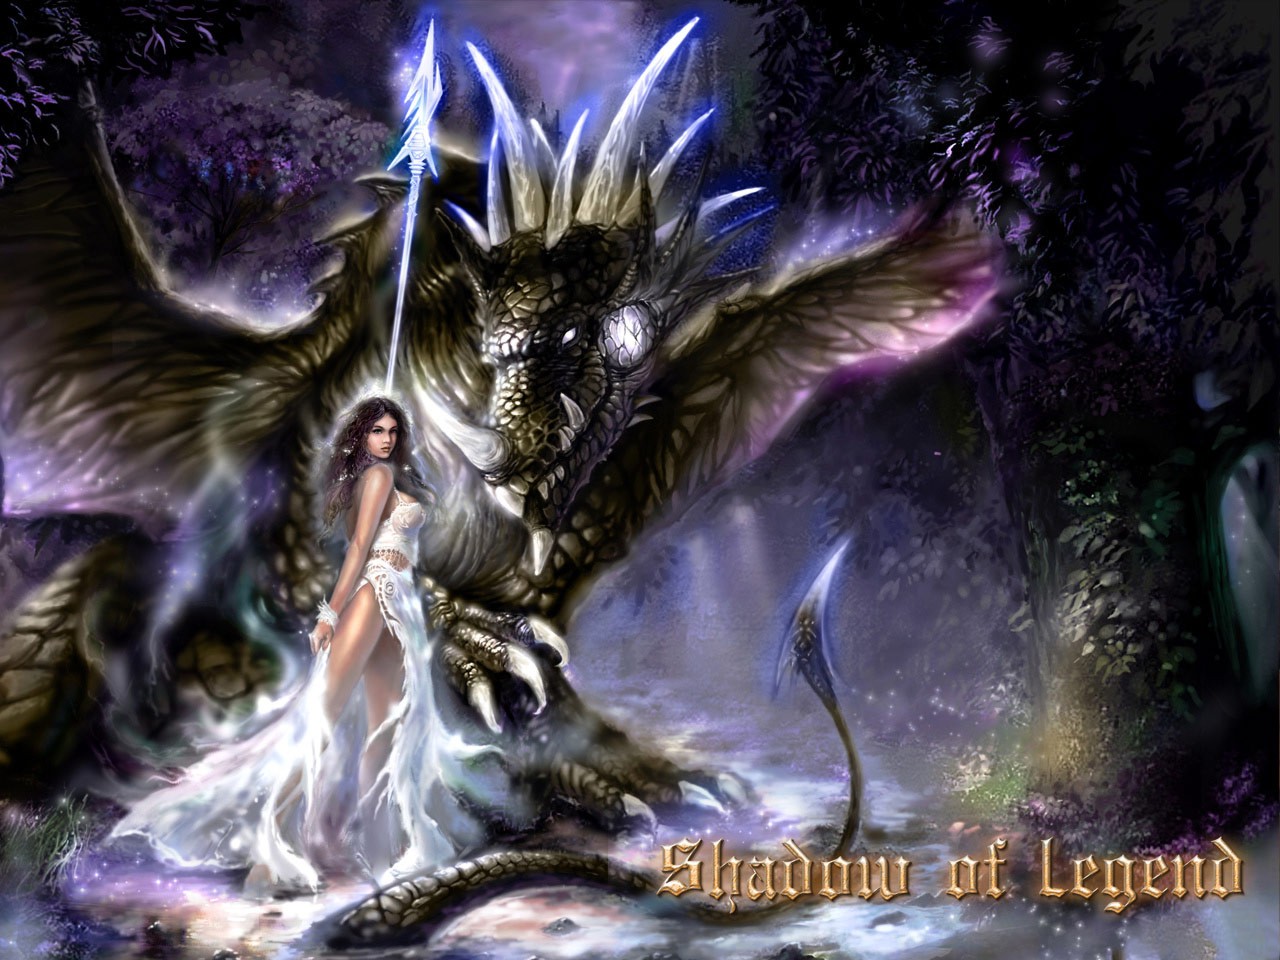 Download High quality Shadow of Legend wallpaper / Games / 1280x960